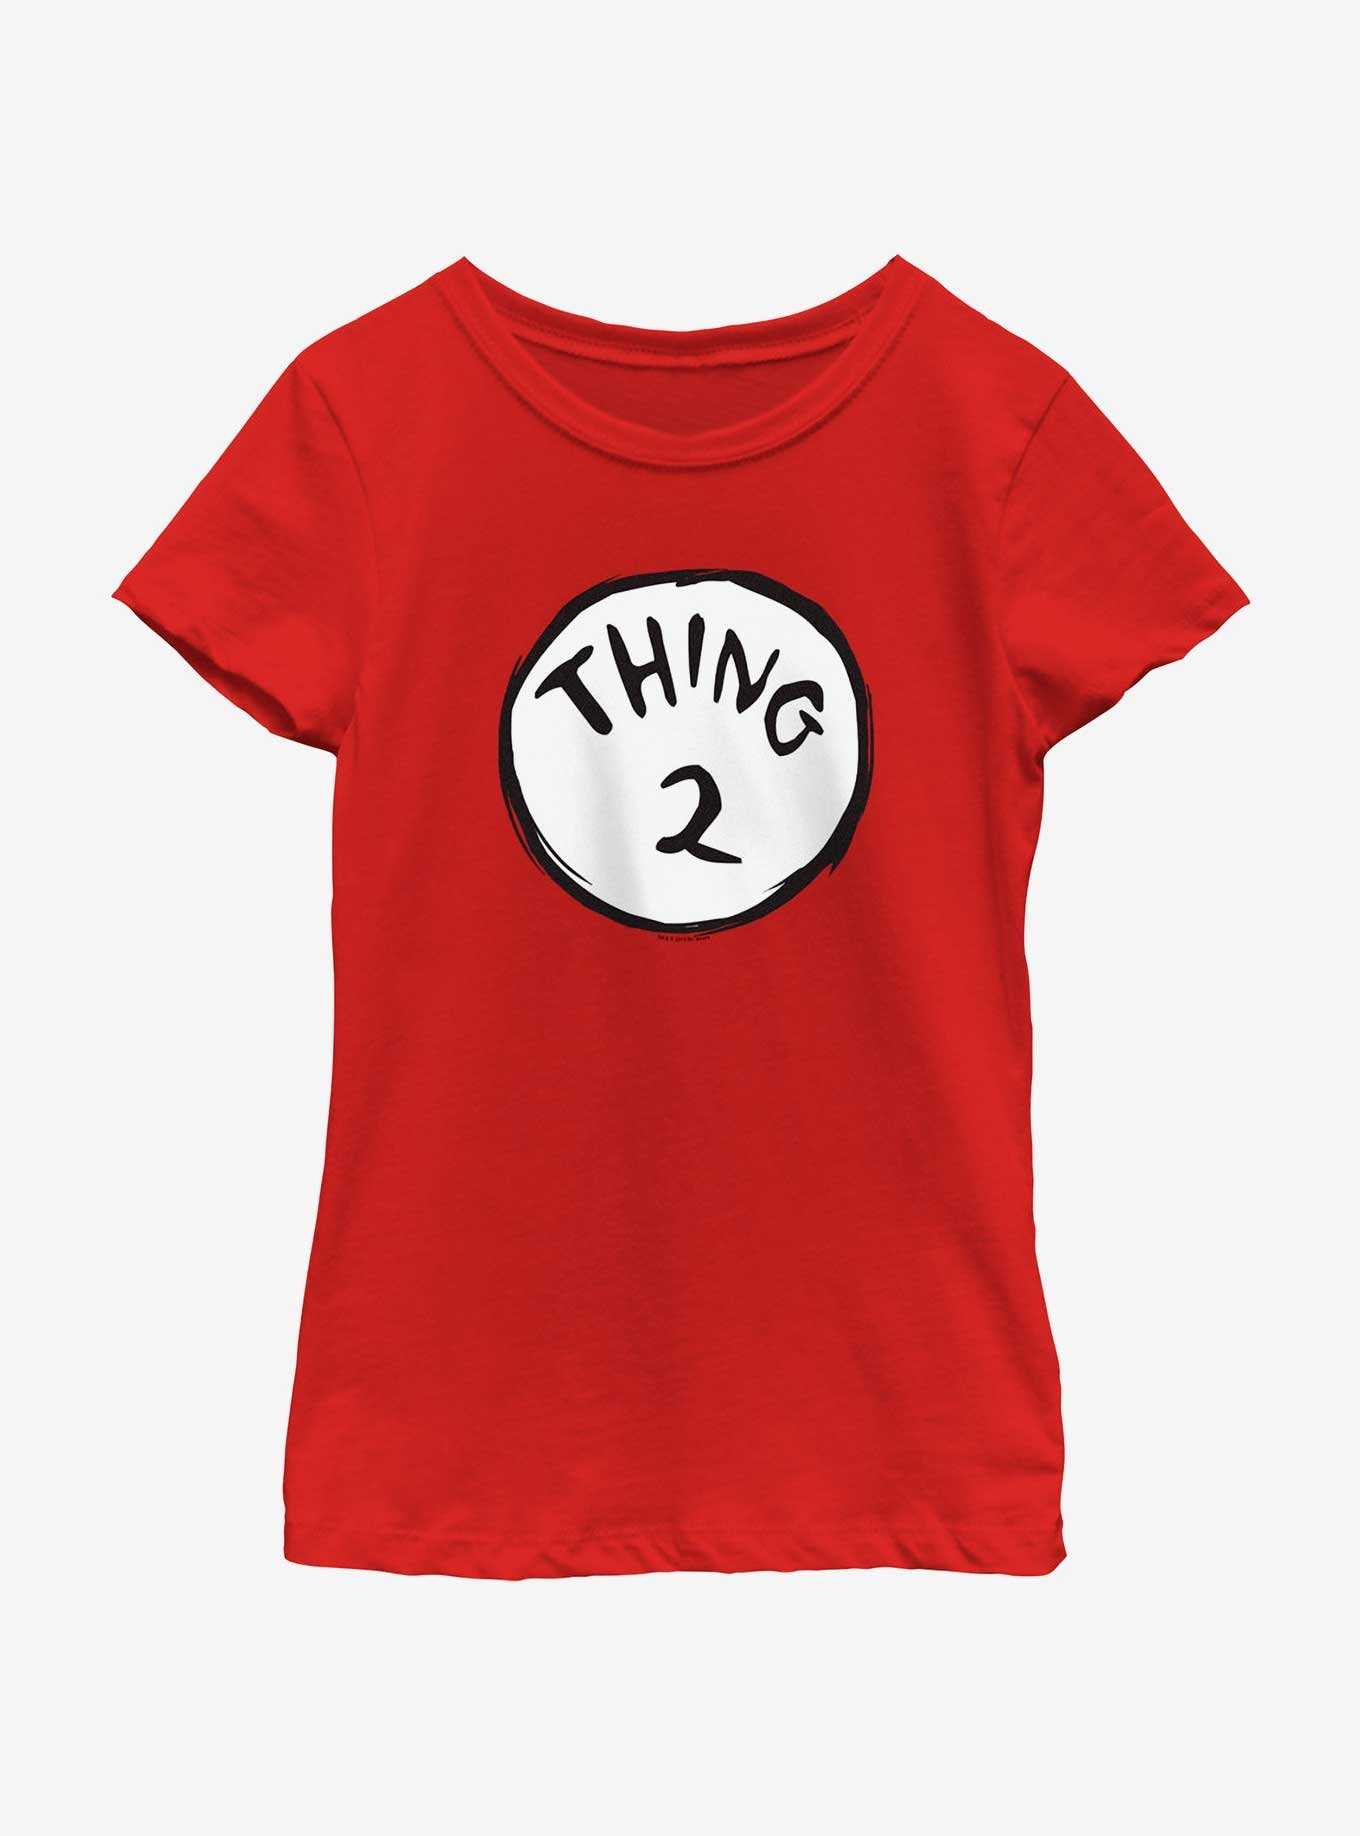 Dr. Seuss's Cat In The Hat Thing 2 Youth Girls T-Shirt, , hi-res